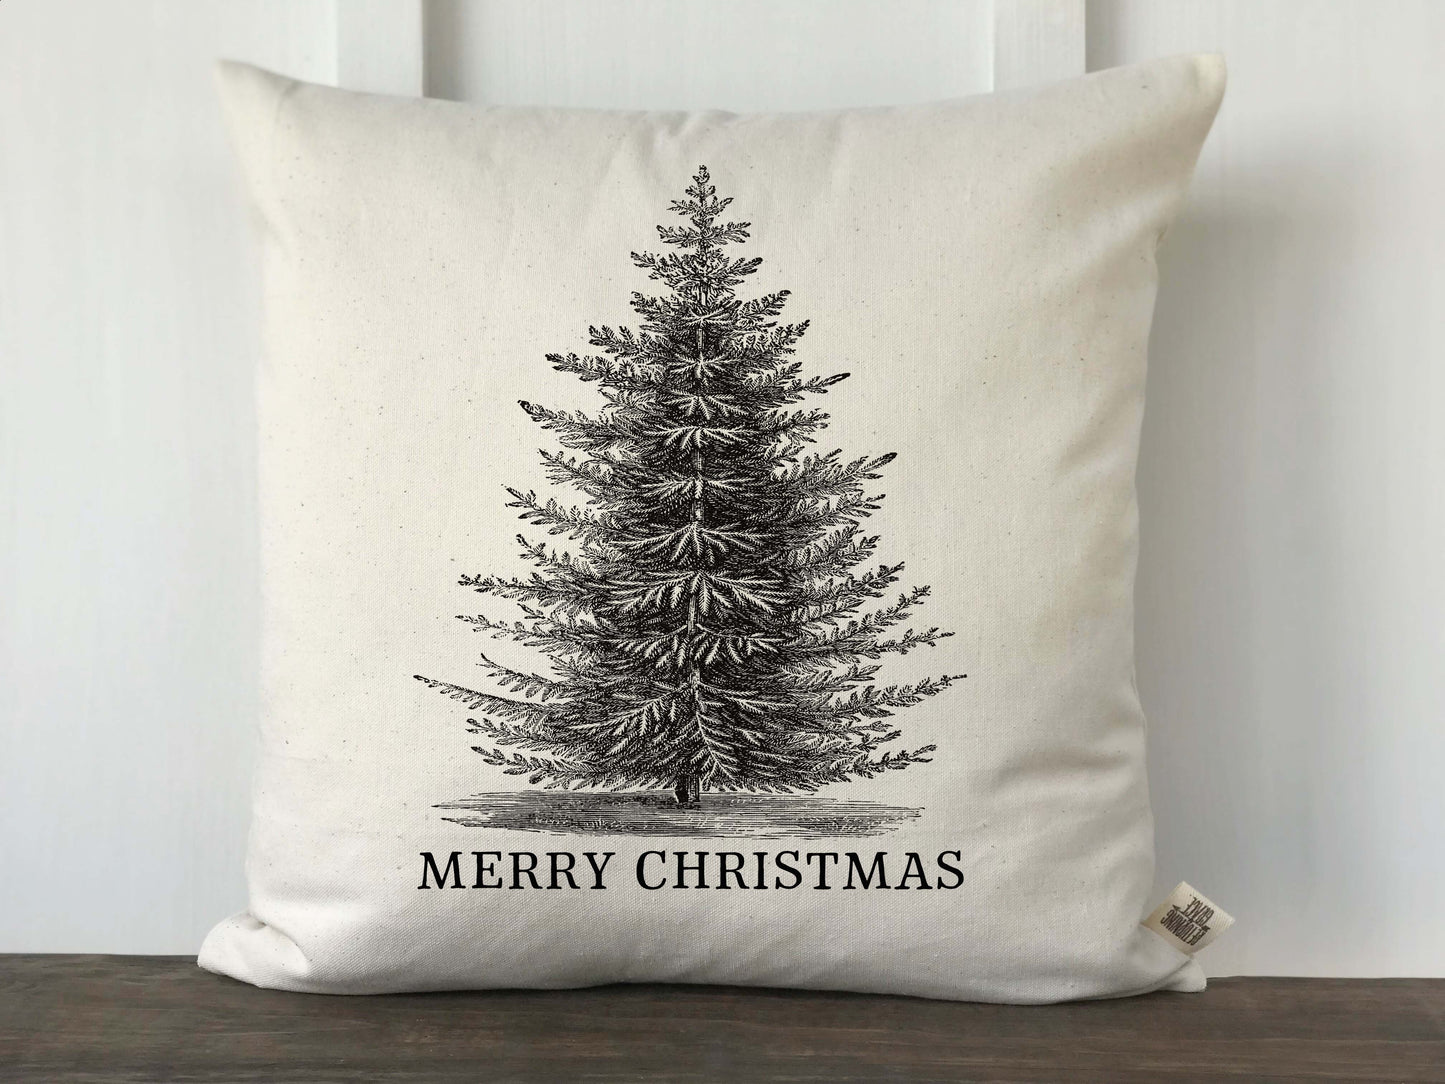 Vintage Christmas Tree Merry Christmas Pillow Cover - Returning Grace Designs